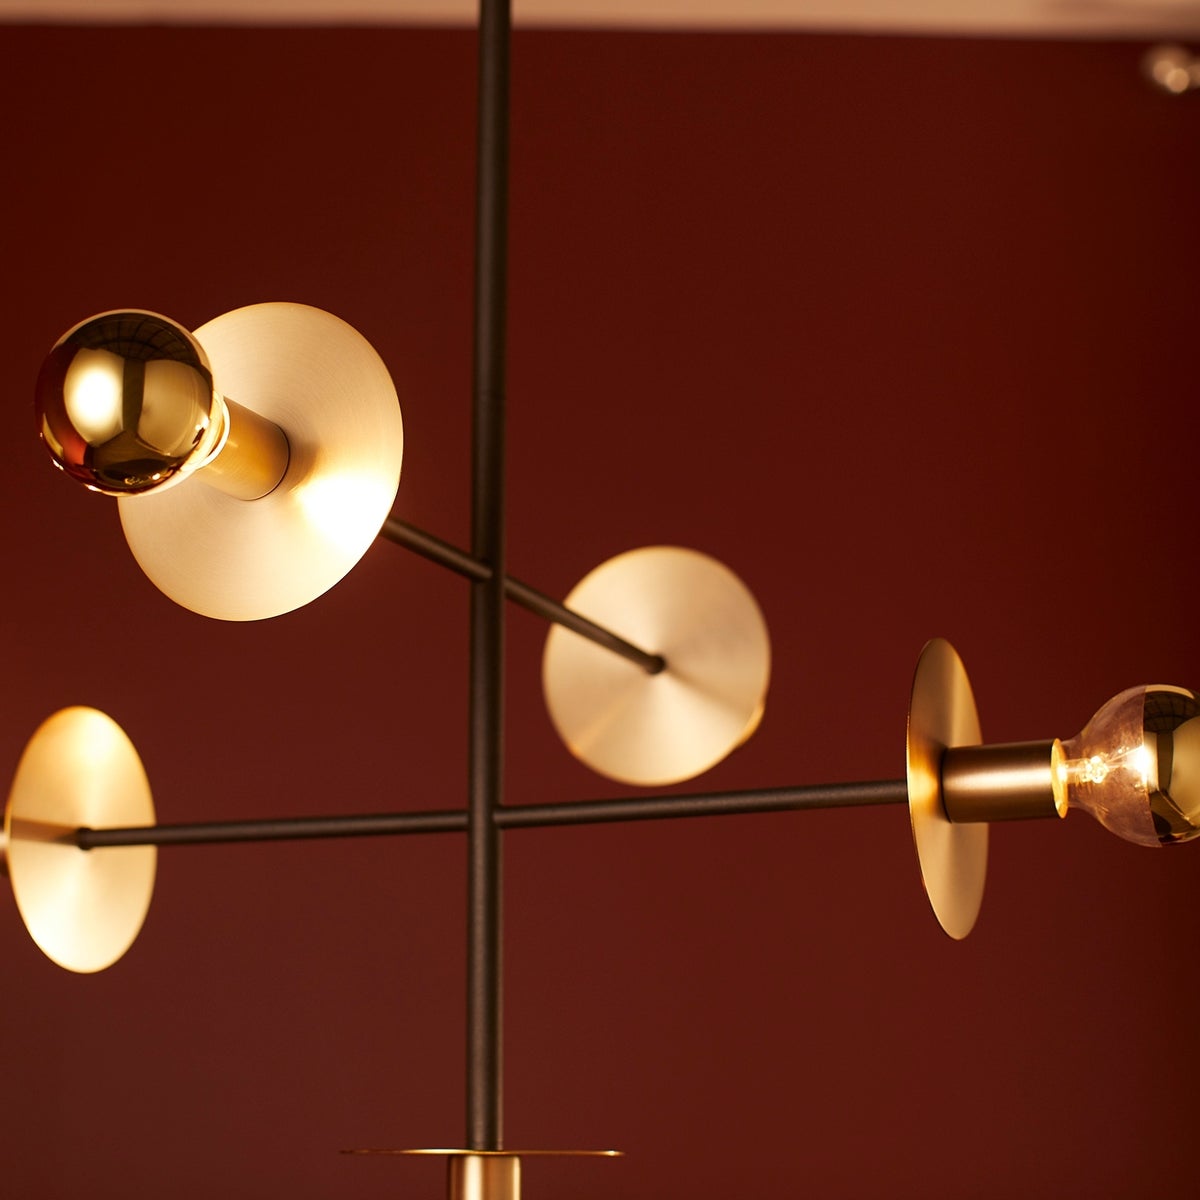 Contemporary pendant light with gold circles and light bulbs, providing multi-directional radiance. Two-toned design in noir and aged brass finishes. Damp Listed for indoor/outdoor installation. 18.5"W x 24"H.